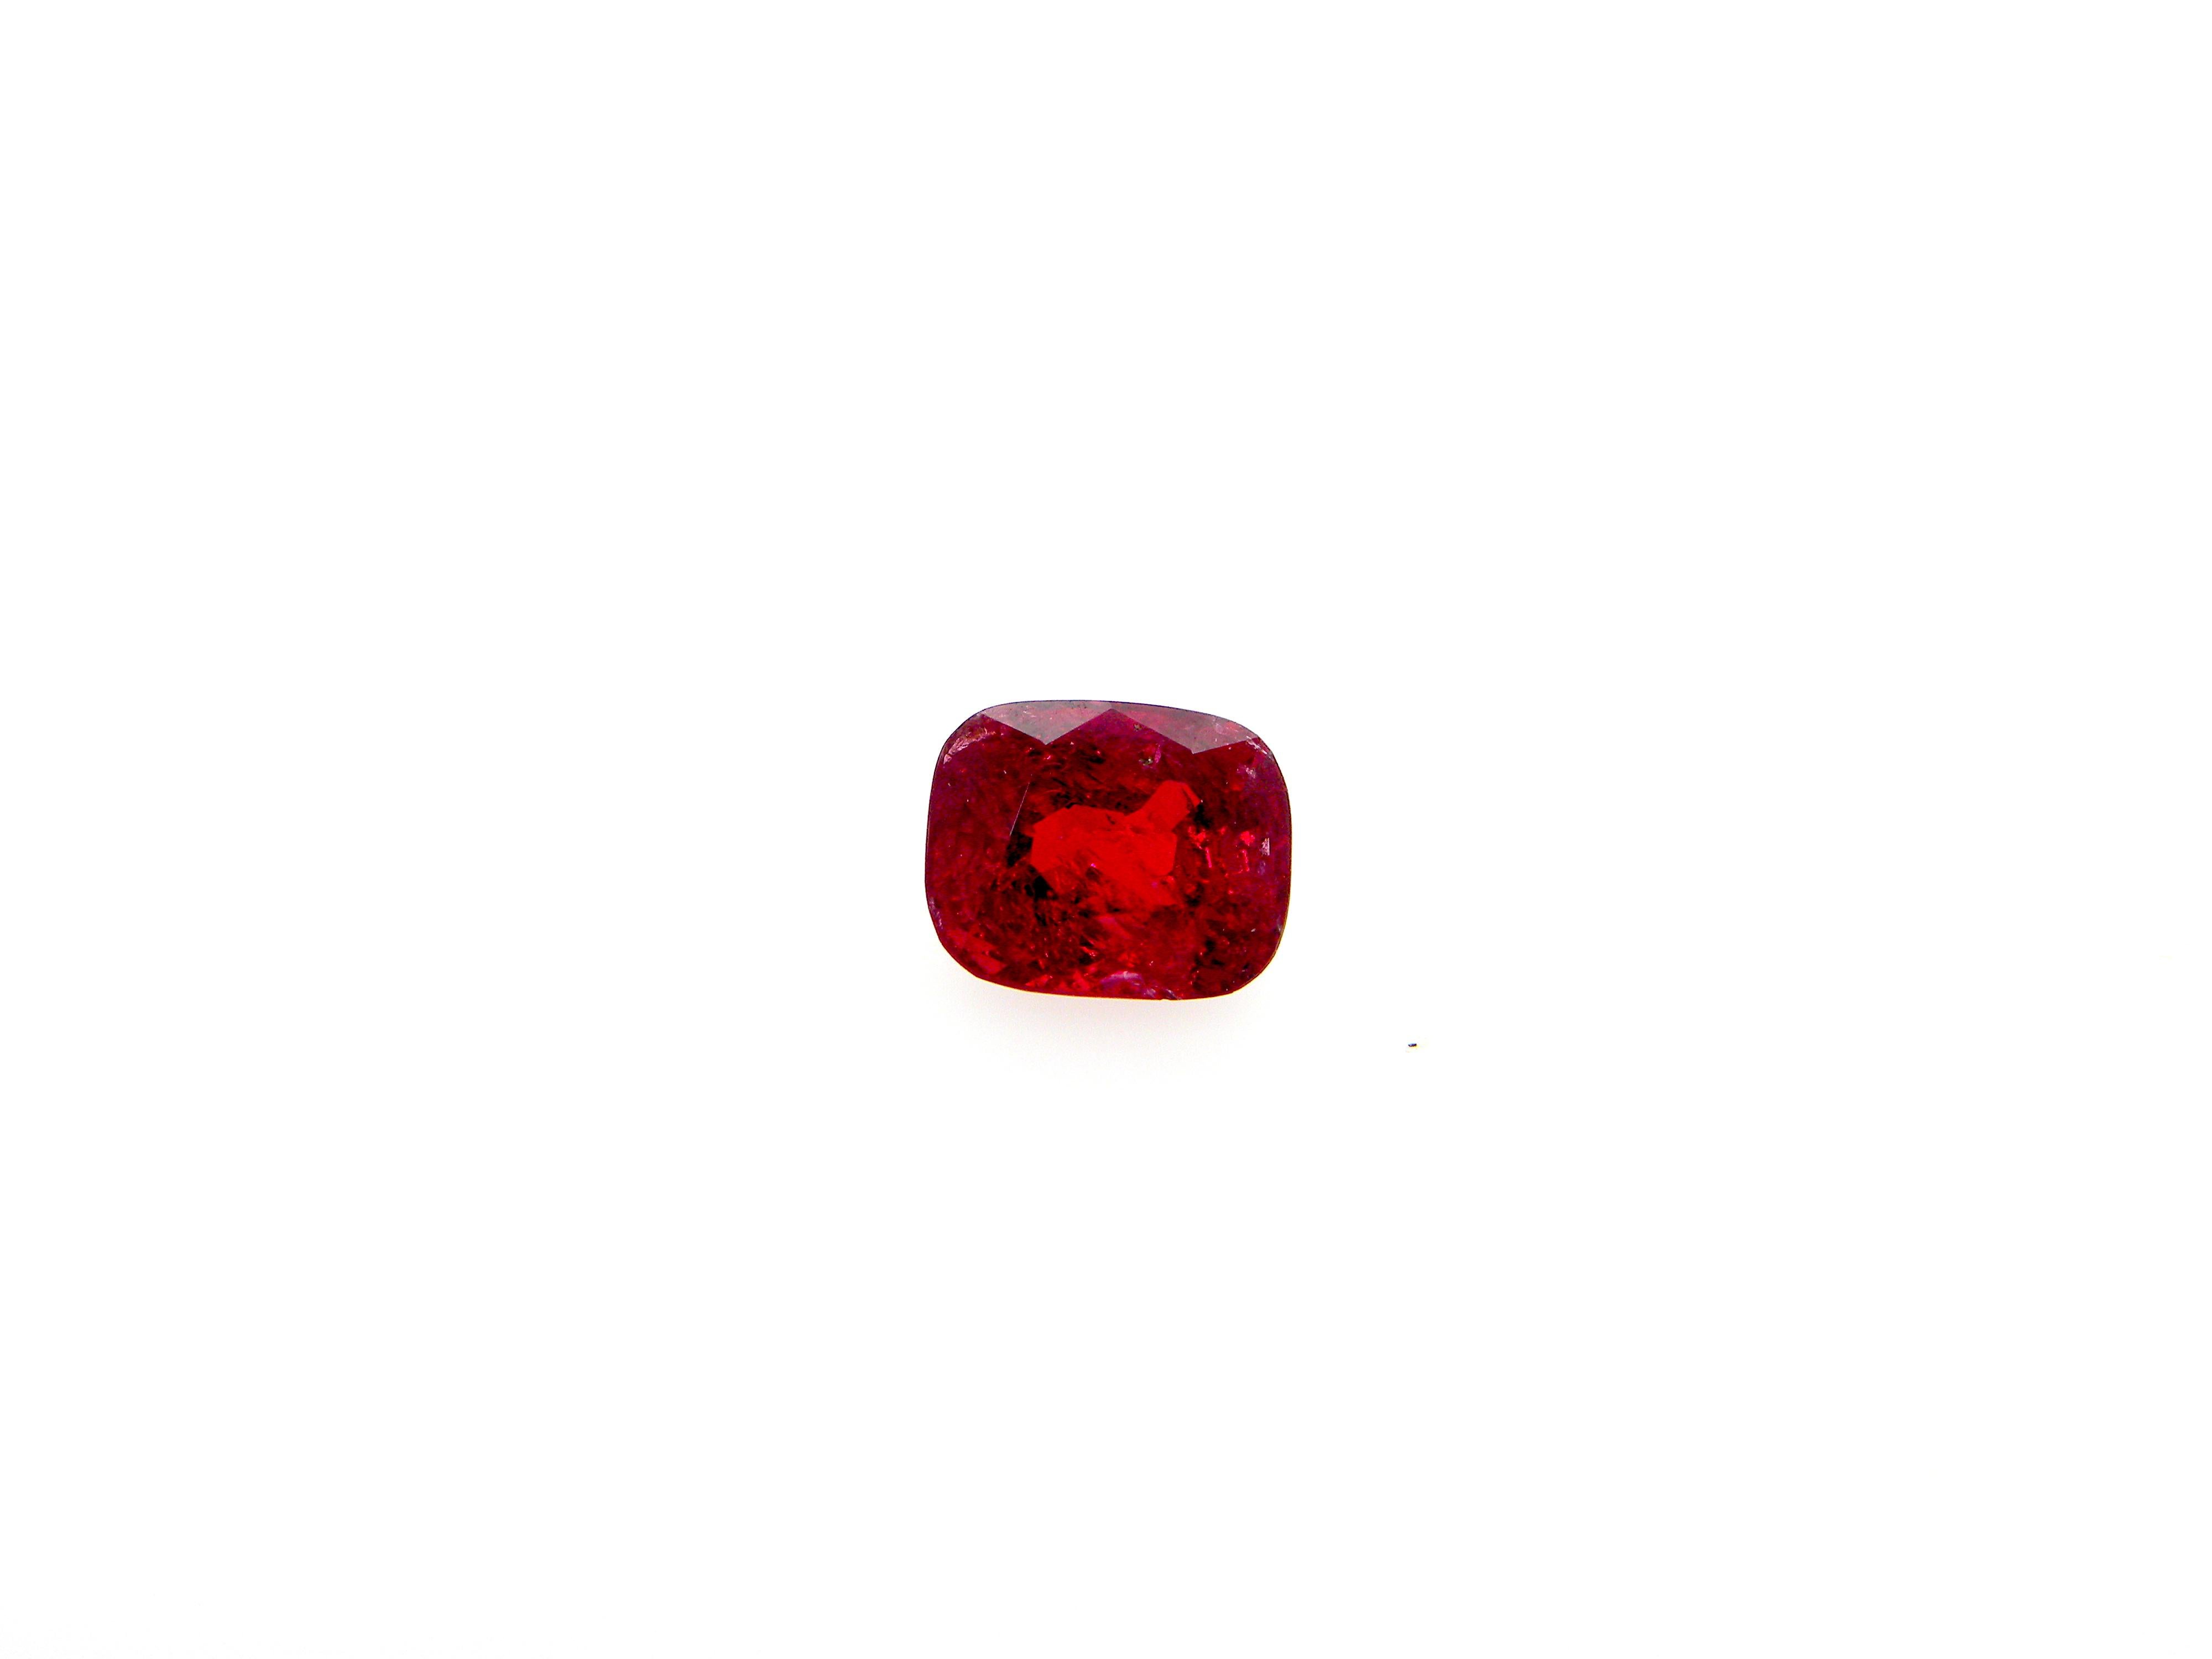 2.39 Carat GRS Certified Unheated Cushion-Cut Burmese Vivid Red Spinel:  

A gorgeous and rare gem, it is a 2.40 carat GRS certified unheated cushion-cut Burmese vivid red spinel. Hailing from the historic Mogok mines in Burma as certified by GRS